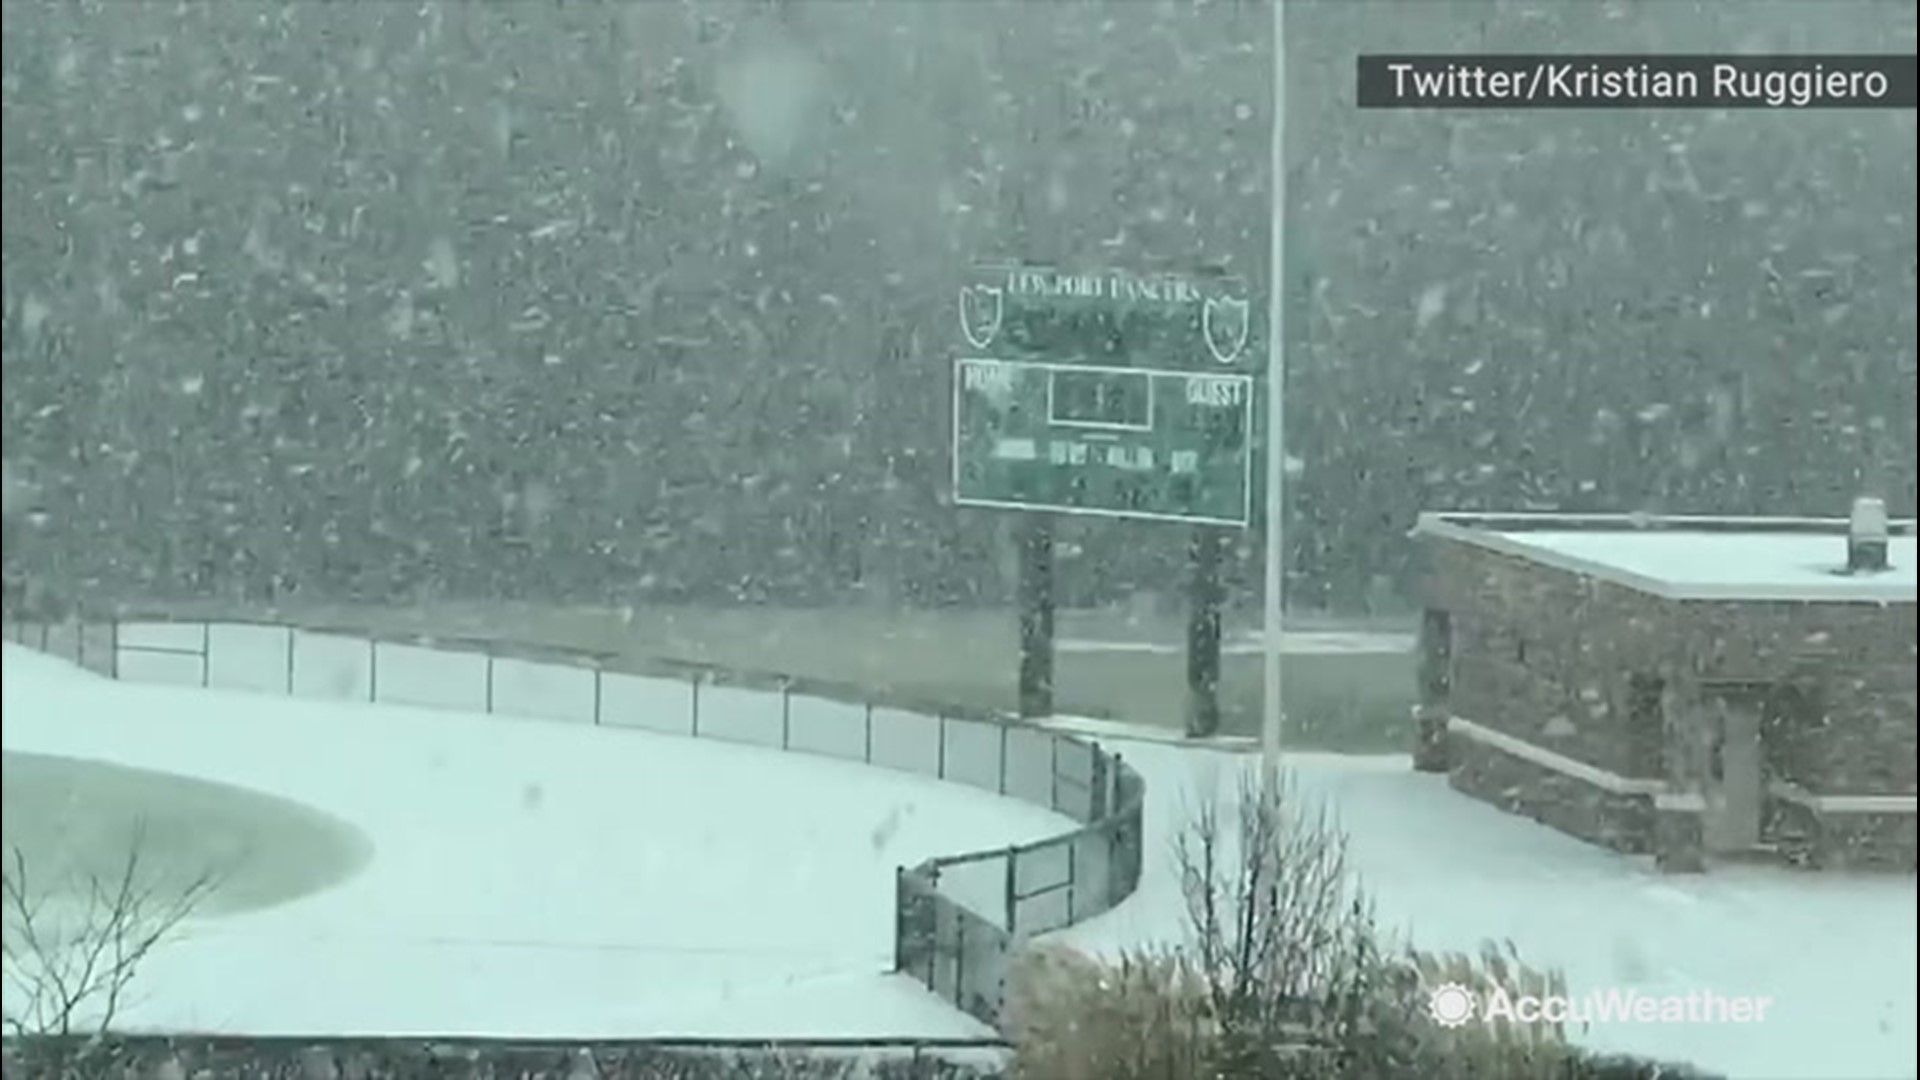 Heavy snowfall from Lake Erie is bearing down on Youngstown, New York, on Dec. 11. It's not often you see that according to the recorder of this video.